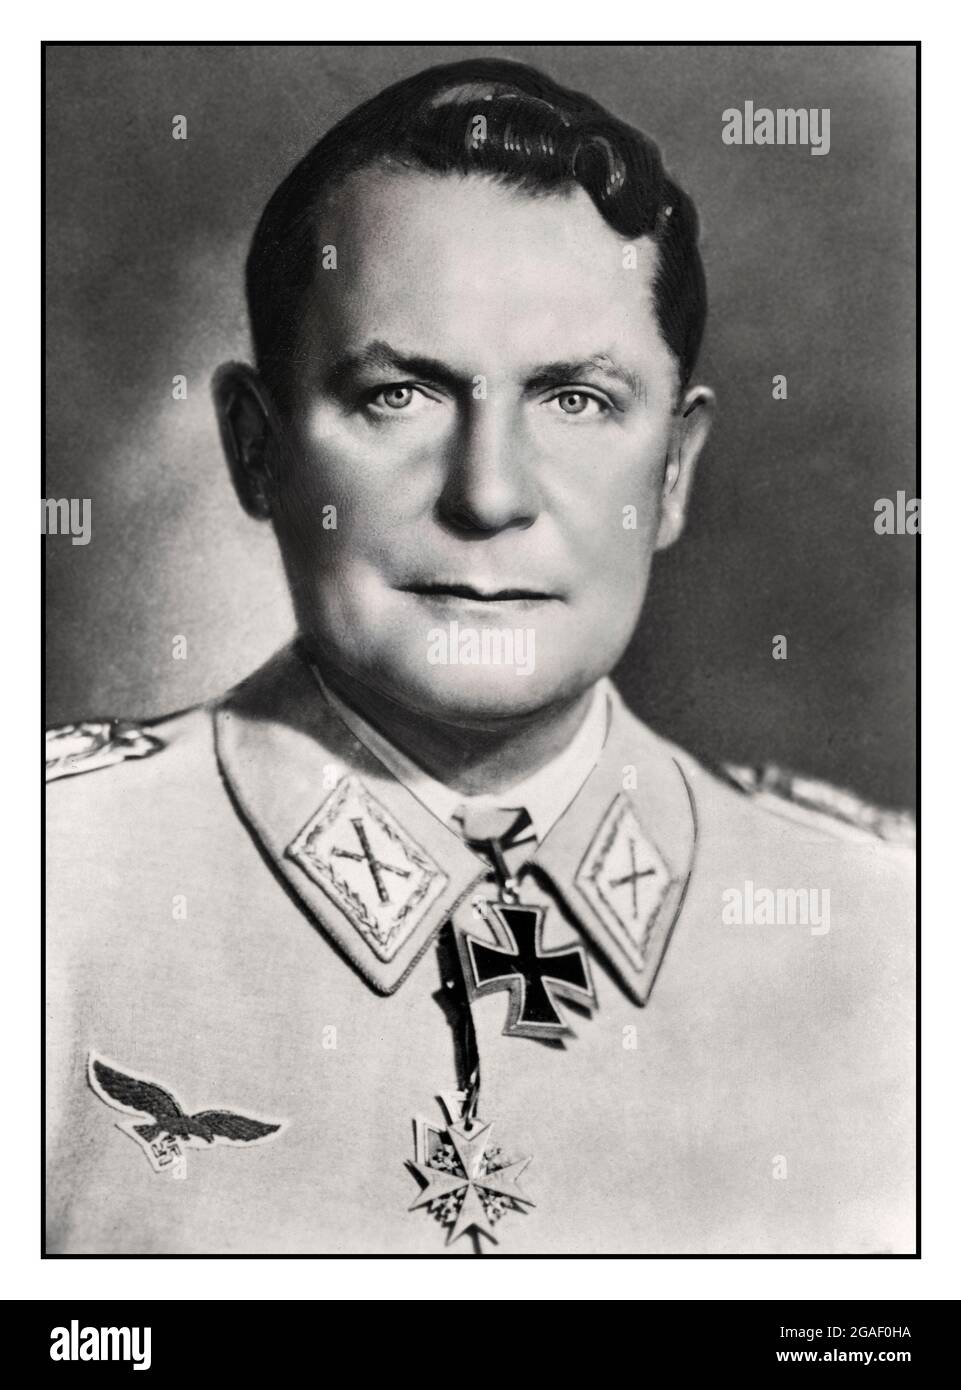 Hermann Goering (Goring), German Nazi Reichsmarschall An official portrait photograph taken on the occasion of his 52nd birthday. Date  Jan. 12, 1941 Hermann Wilhelm Göring was a German political and military leader and convicted war criminal. He was one of the most powerful figures in the Nazi Party, which ruled Germany from 1933 to 1945. A veteran World War I fighter pilot ace, he was a recipient of the Pour le Mérite medal which is worn in this image.Hermann Göring, also spelled Goering, (born January 12, 1893, Rosenheim, Germany—died October 15, 1946 by his own hand at Nürnberg prison. Stock Photo